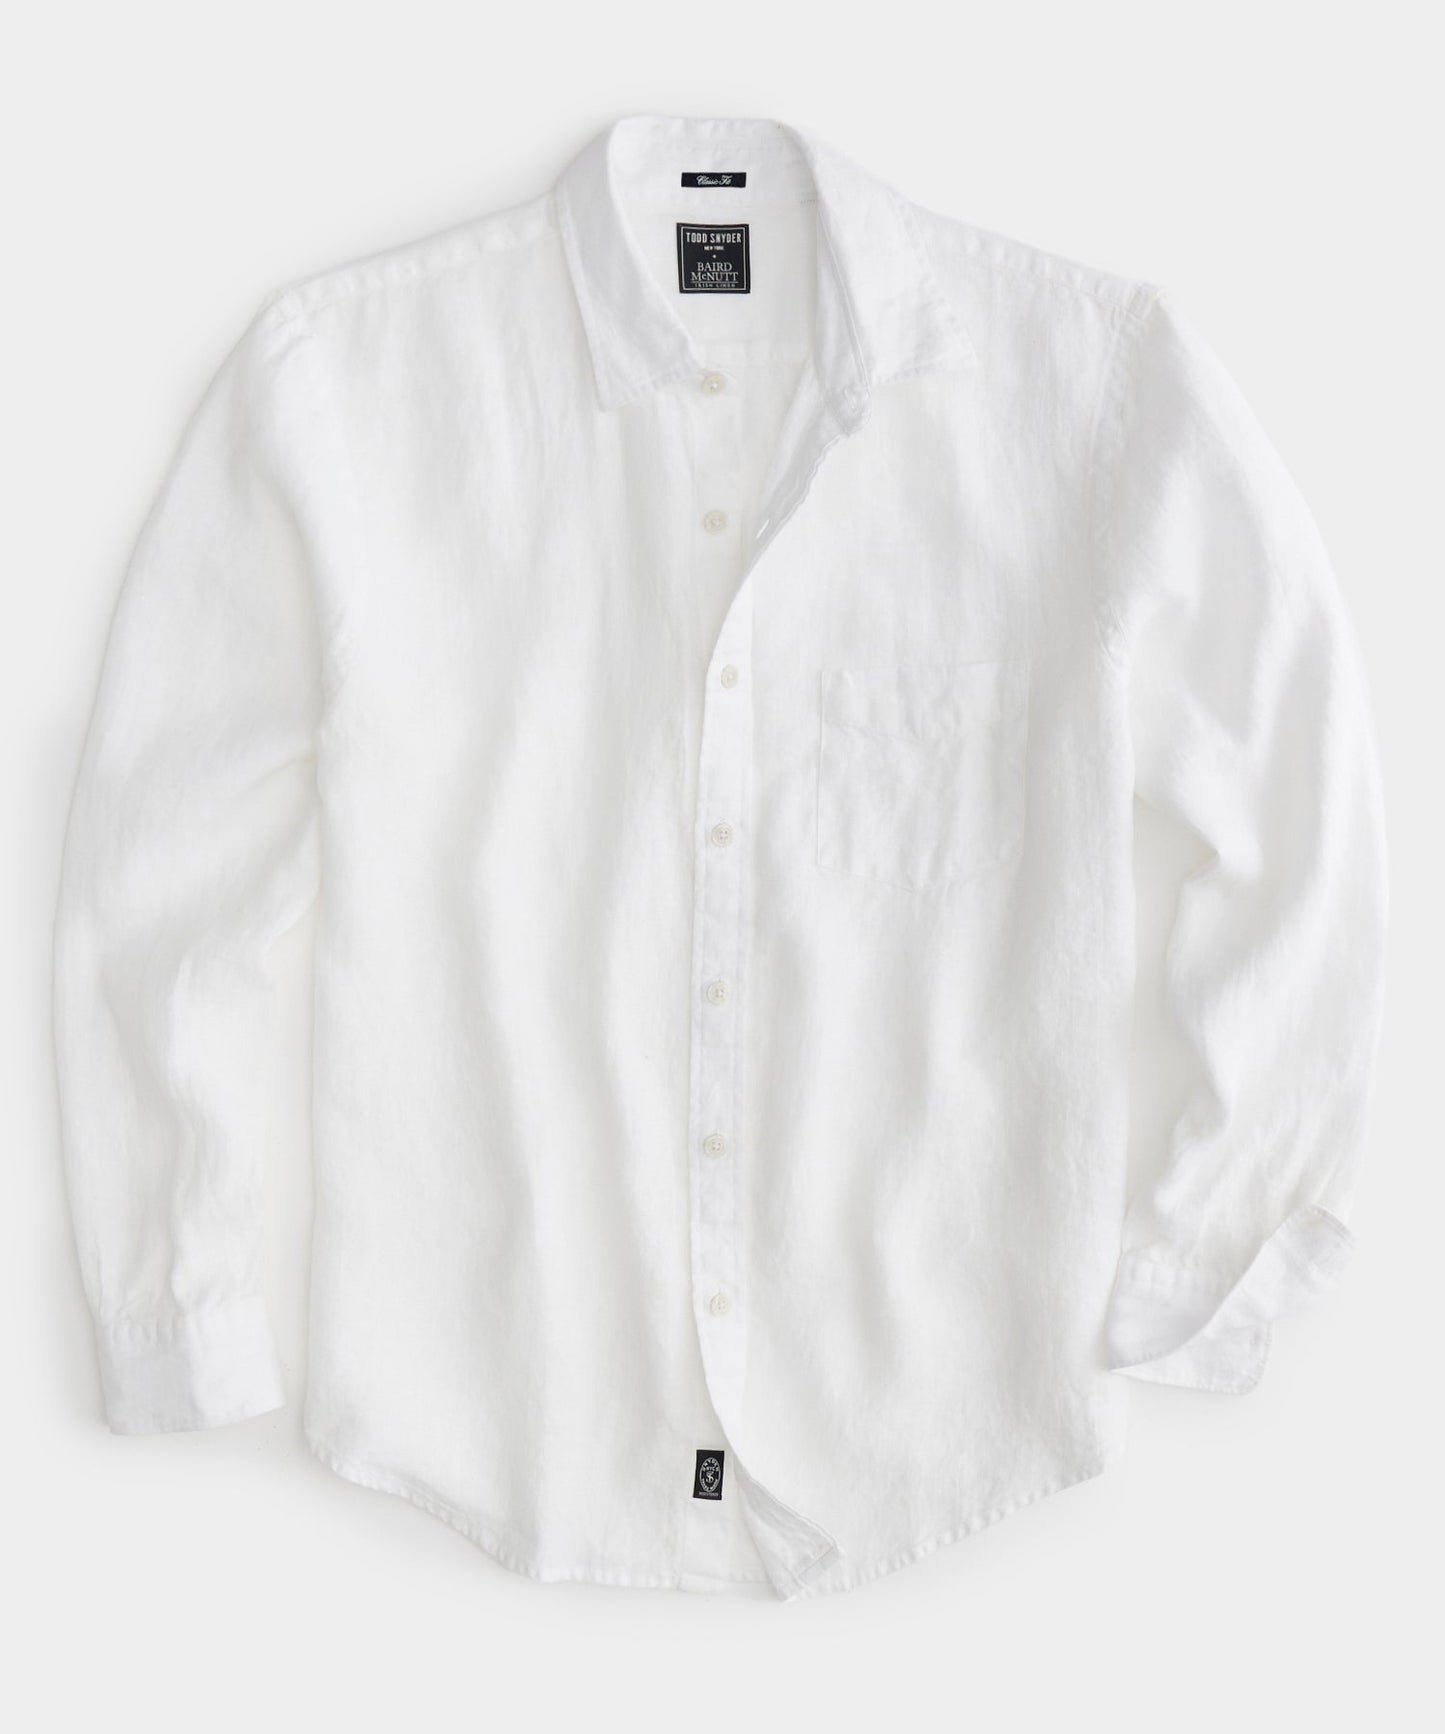 Todd Snyder - TODD SNYDER CLASSIC FIT SEA SOFT IRISH LINEN SHIRT IN WHITE - Rent With Thred